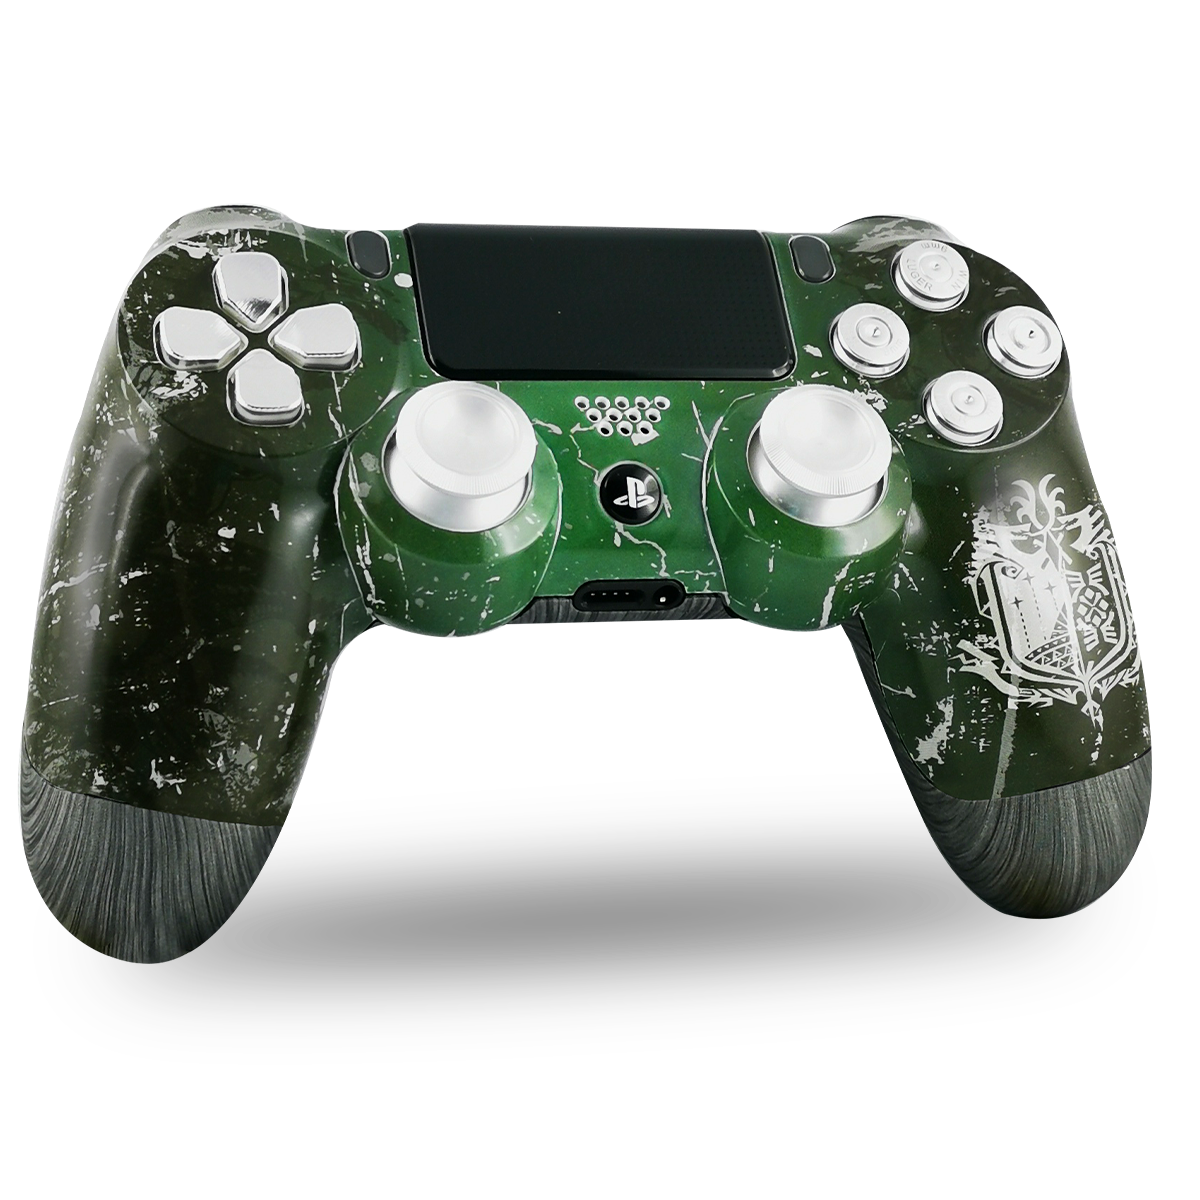 manette-PS4-custom-playstation-4-sony-personnalisee-drawmypad-inconnu17